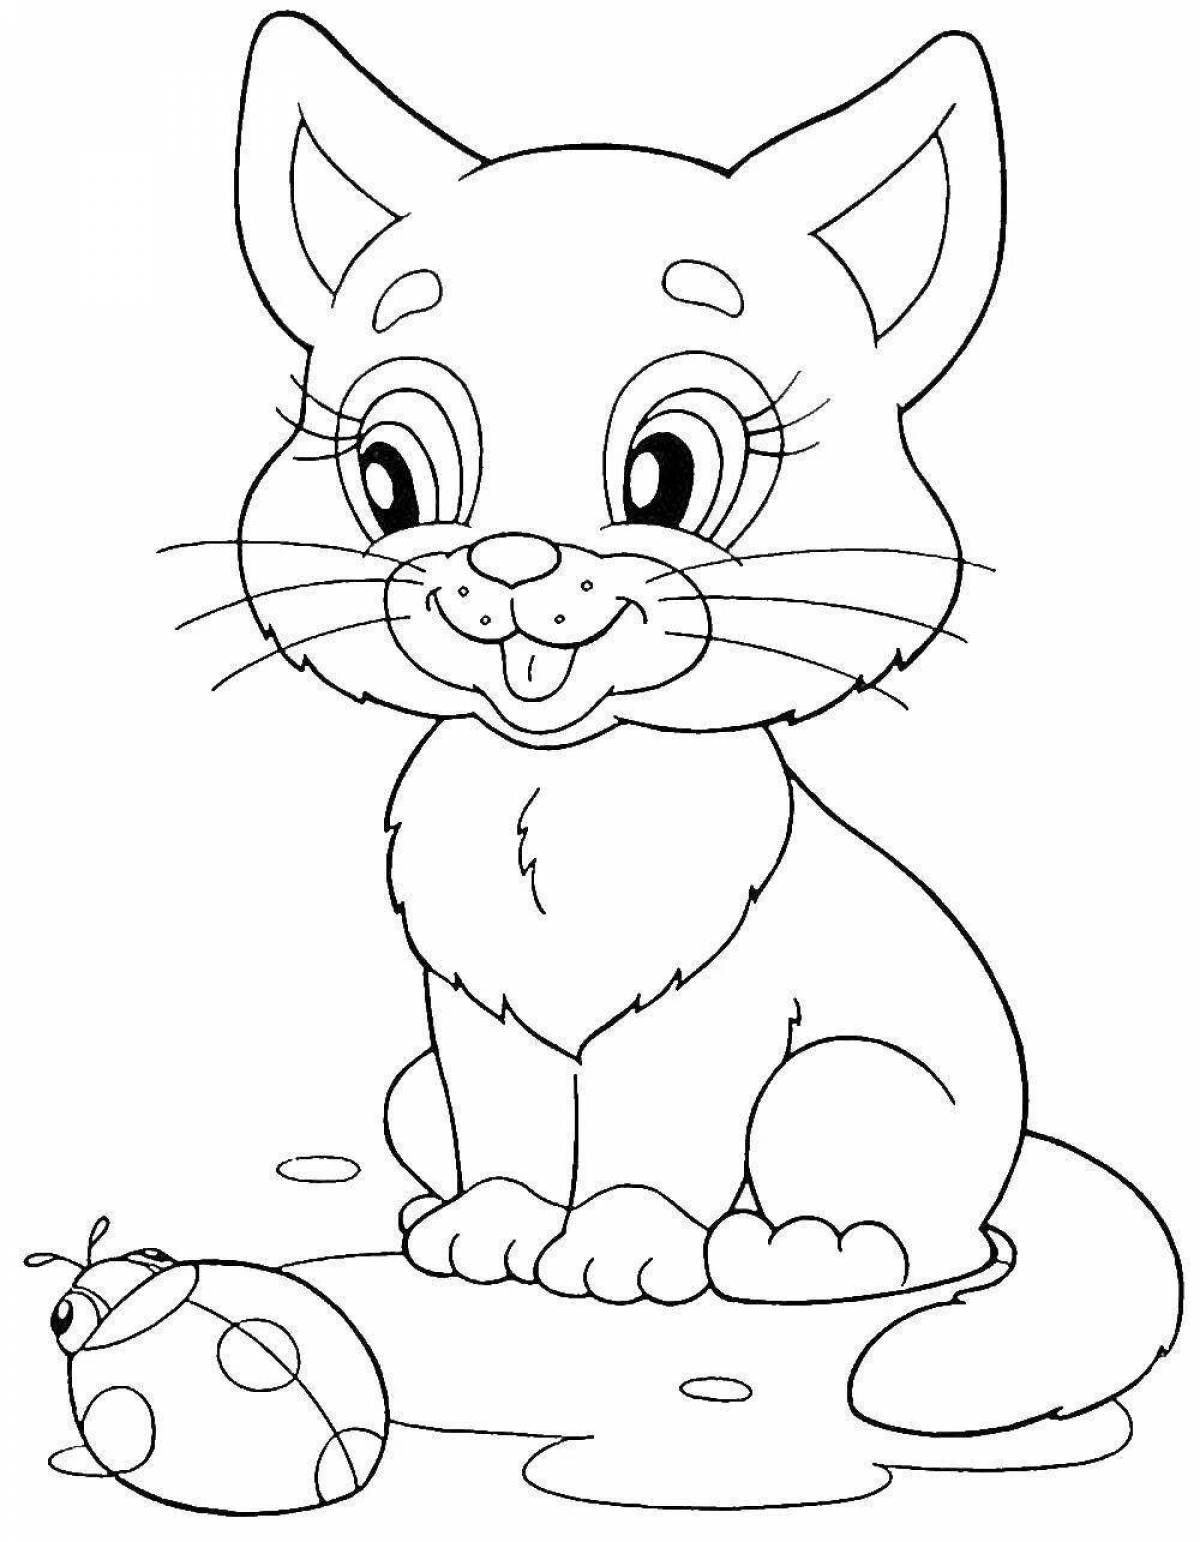 Colorful animal coloring page